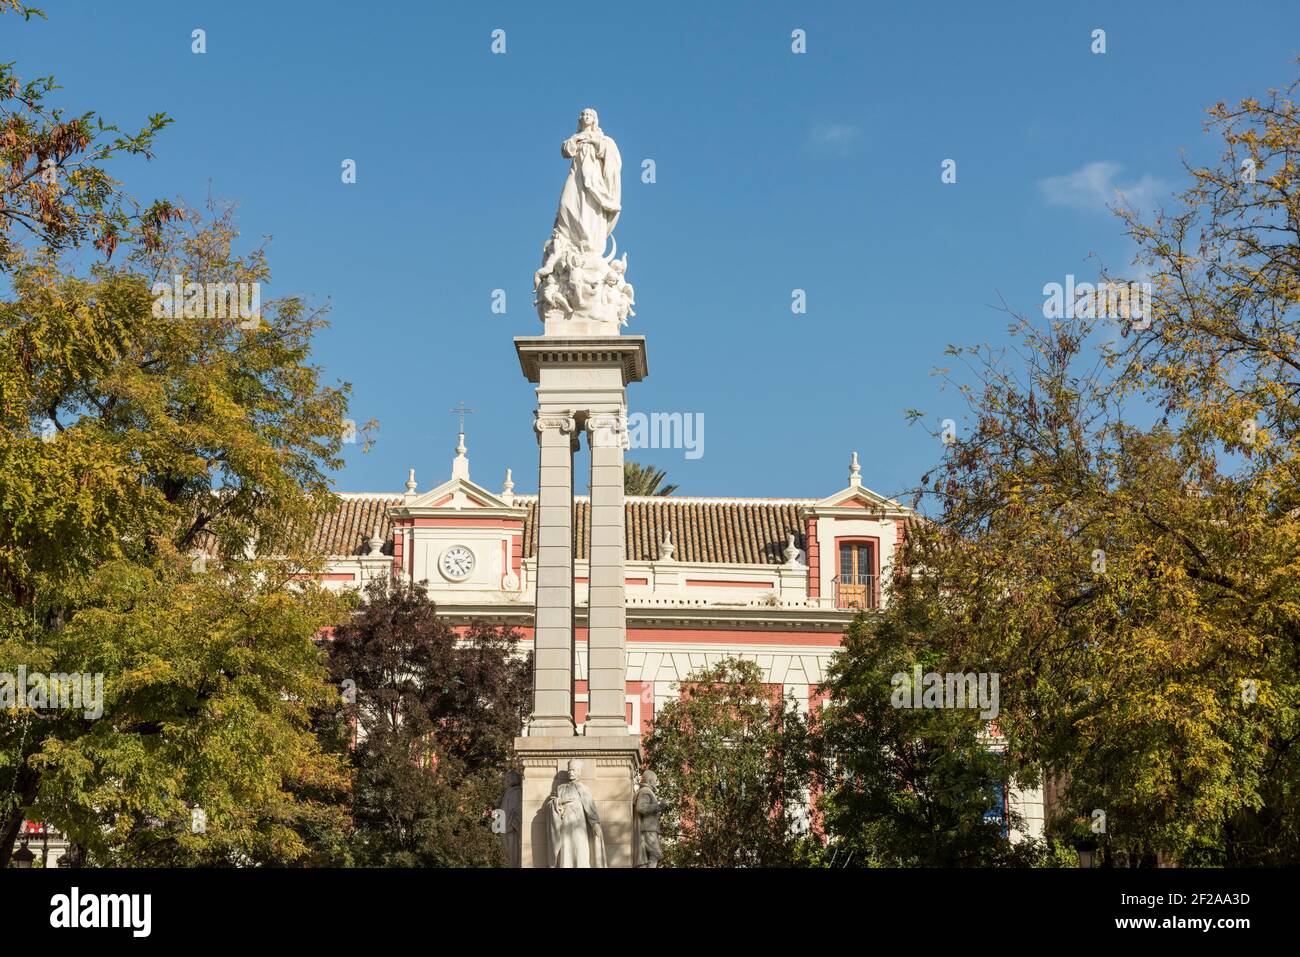 The Monumento a la Inmaculada Concepcion or monument to the immaculate conception Plaza del Triunfo in Seville Spain Stock Photo